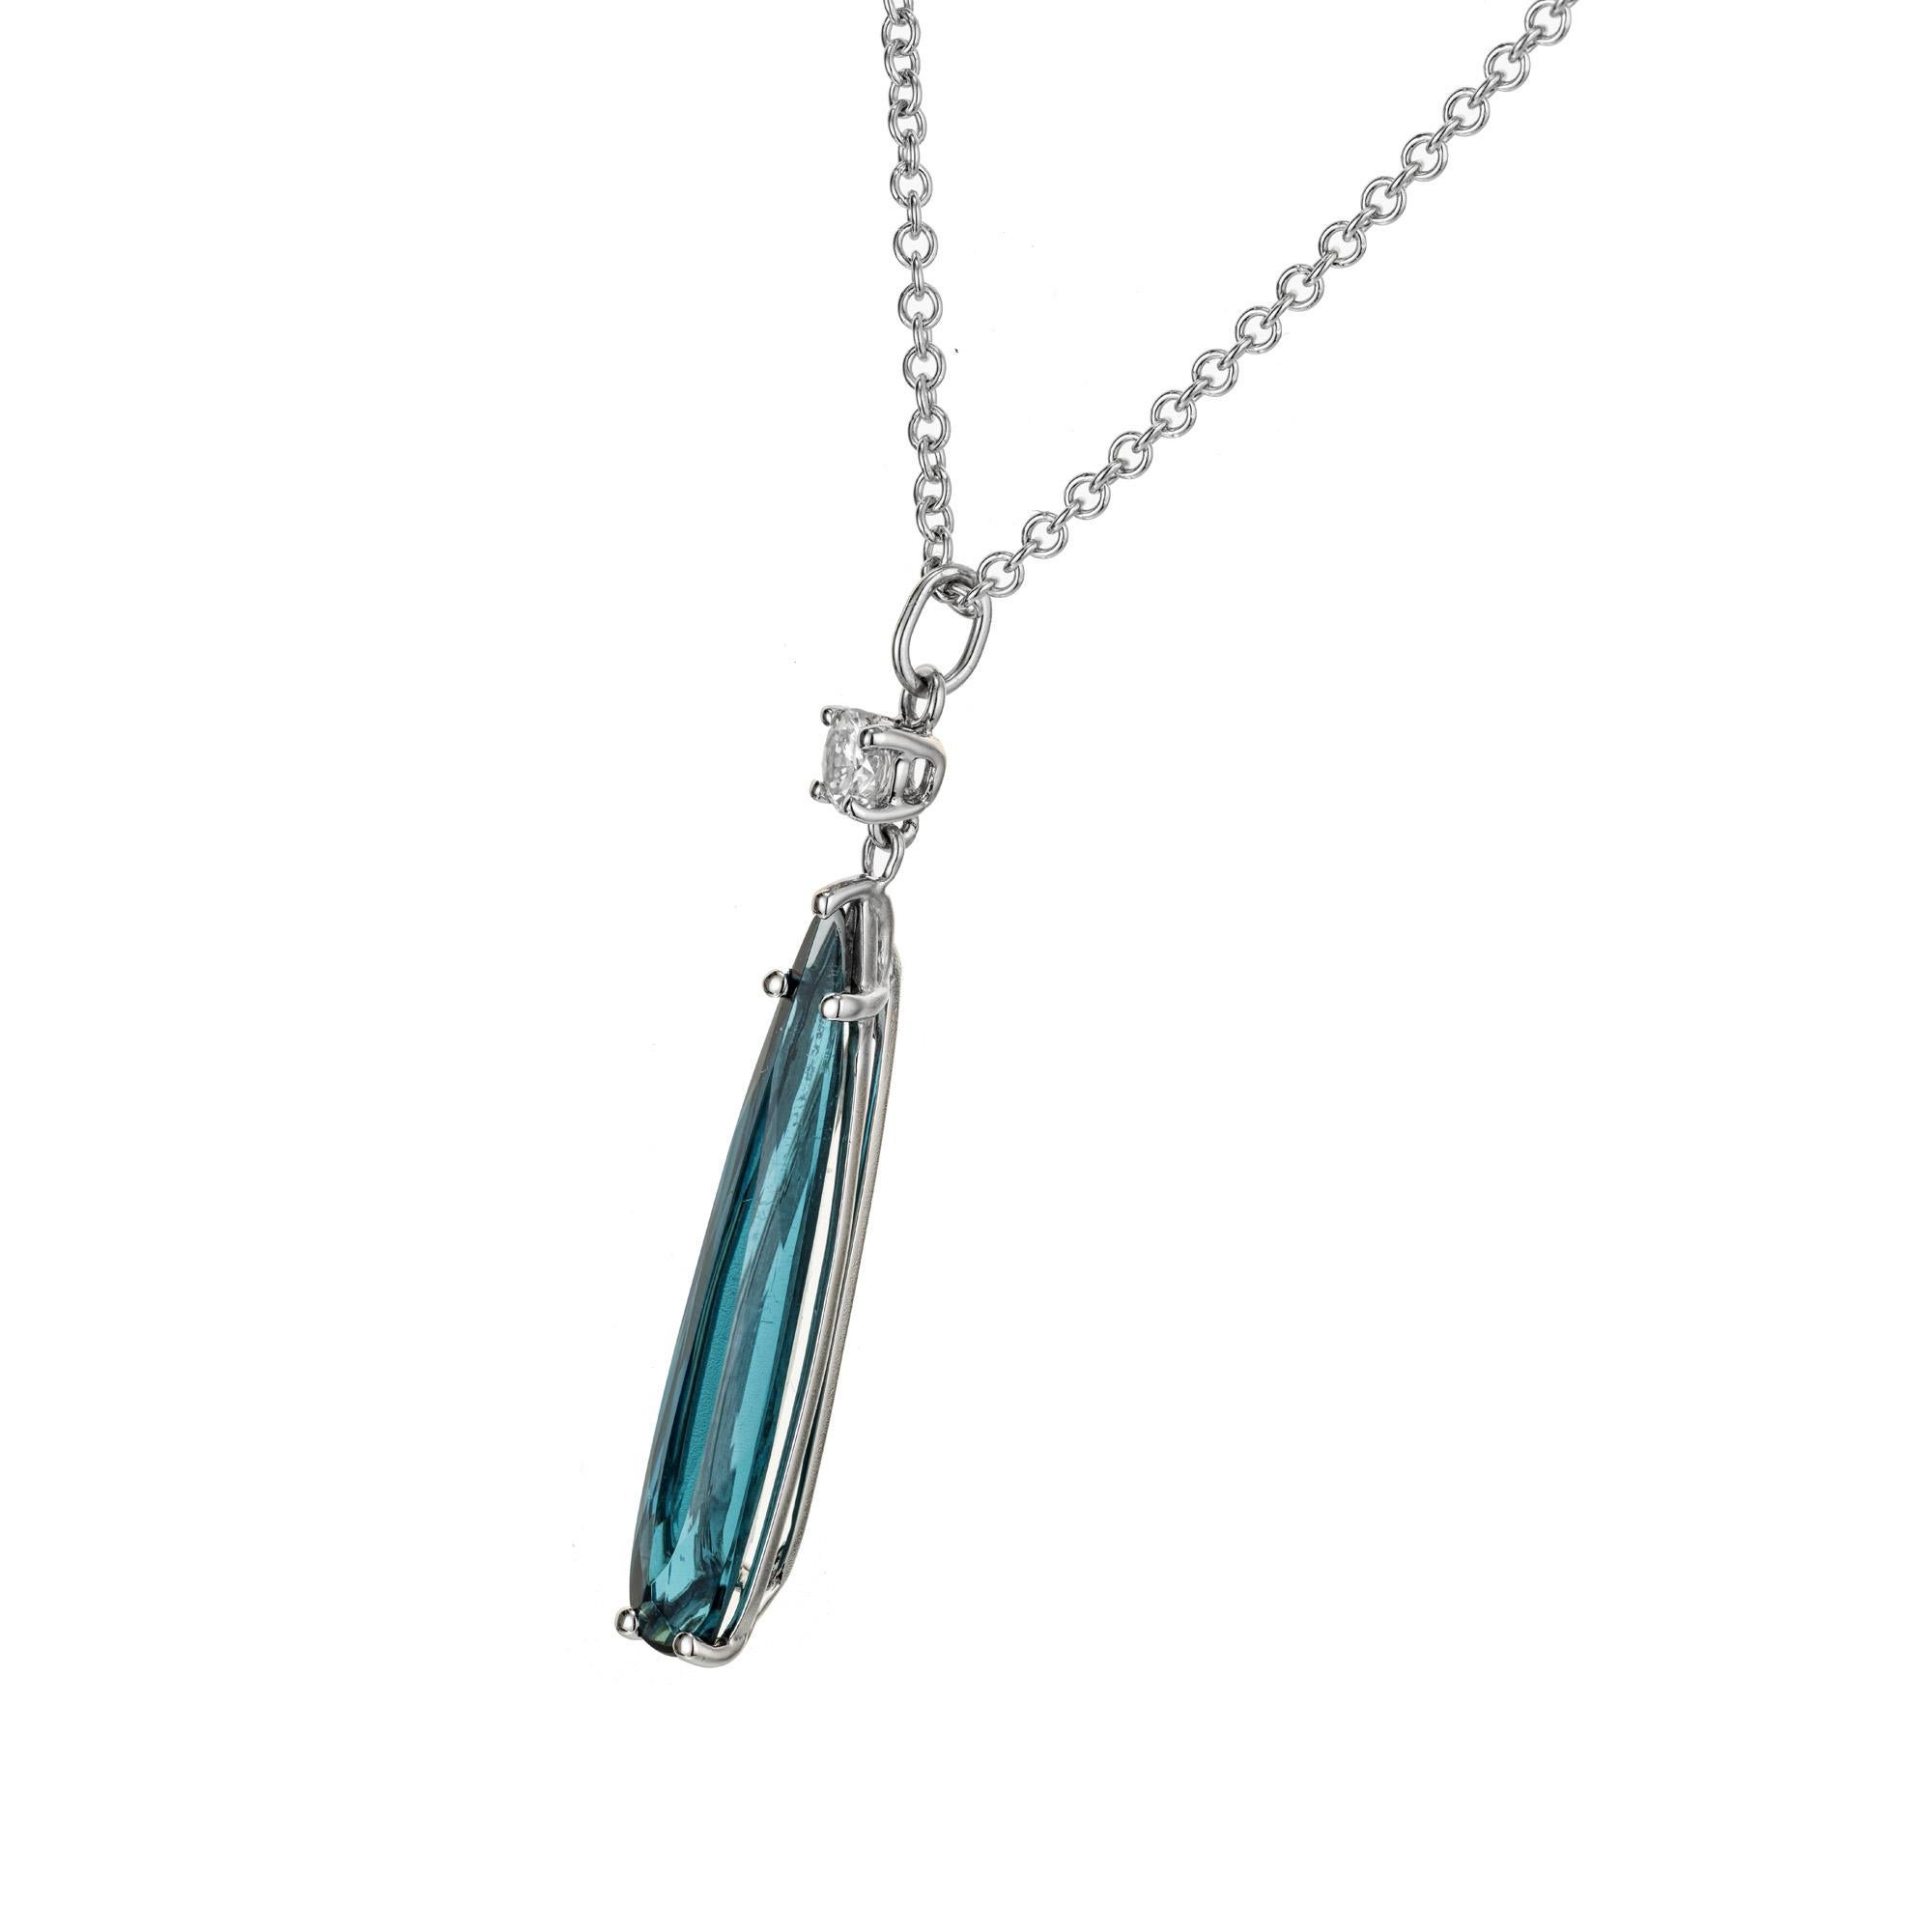 Blue green elongated tourmaline diamond pendant. Pear shaped tourmaline set in 14k white gold, accented with 1 round brilliant cut diamond, 16 inch necklace. Designed and crafted in the Peter Suchy workshop.

1 pear shaped blue tourmaline, VS